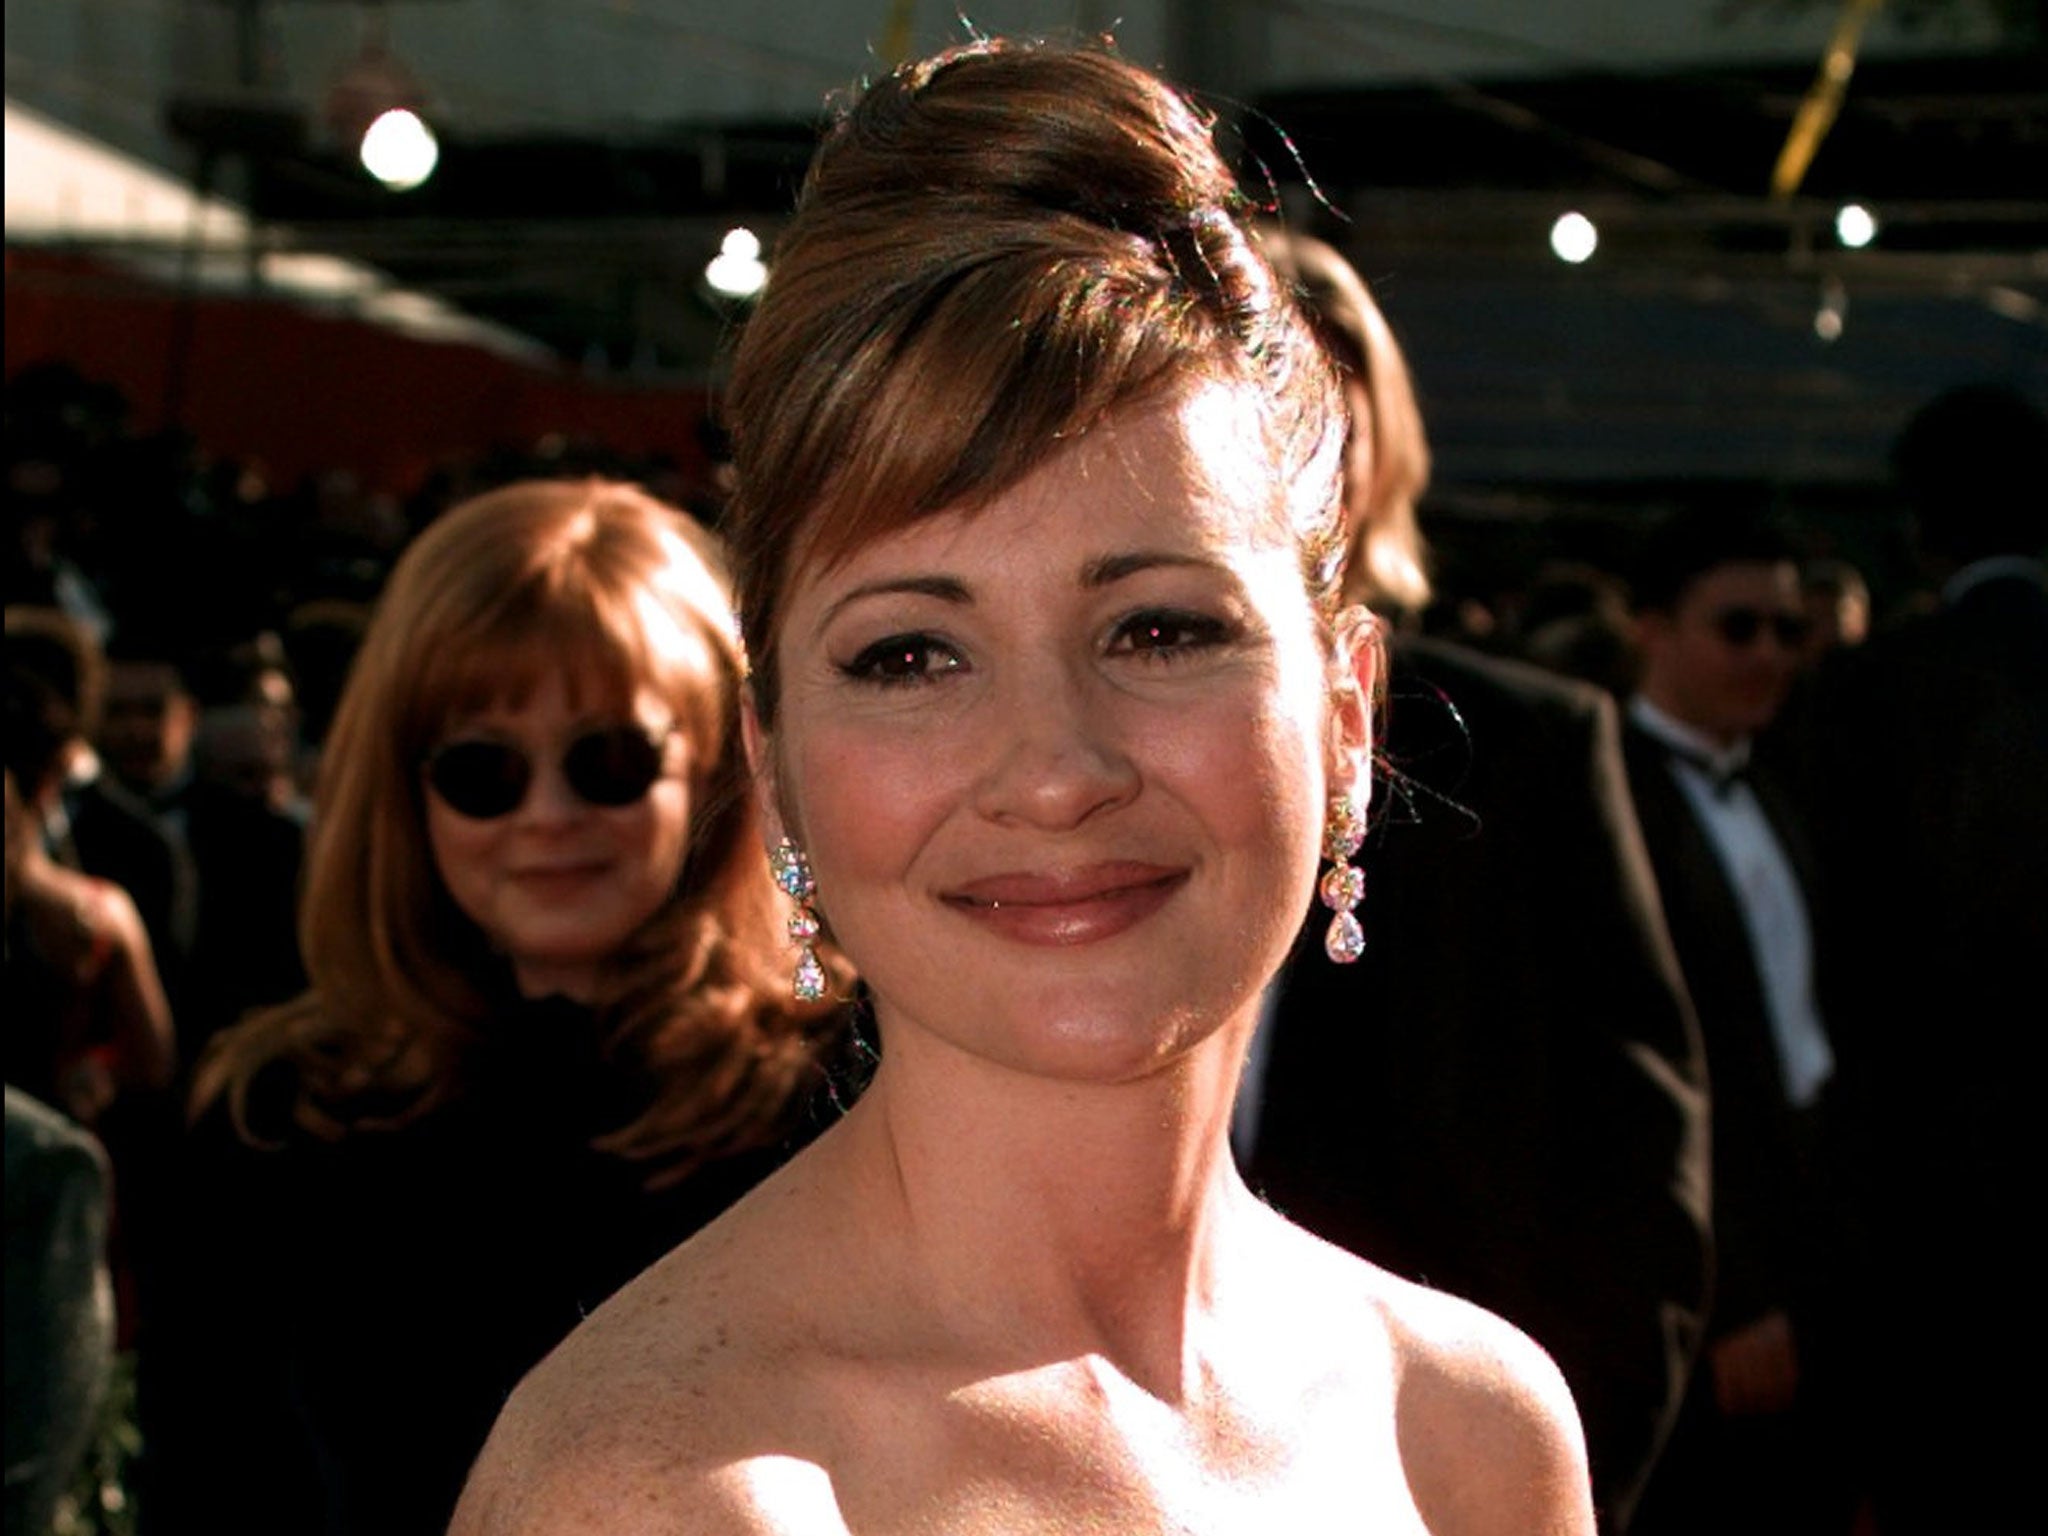 Christine Cavanaugh arrives for the 68th Academy Awards at the Music Center in Los Angeles in 1996